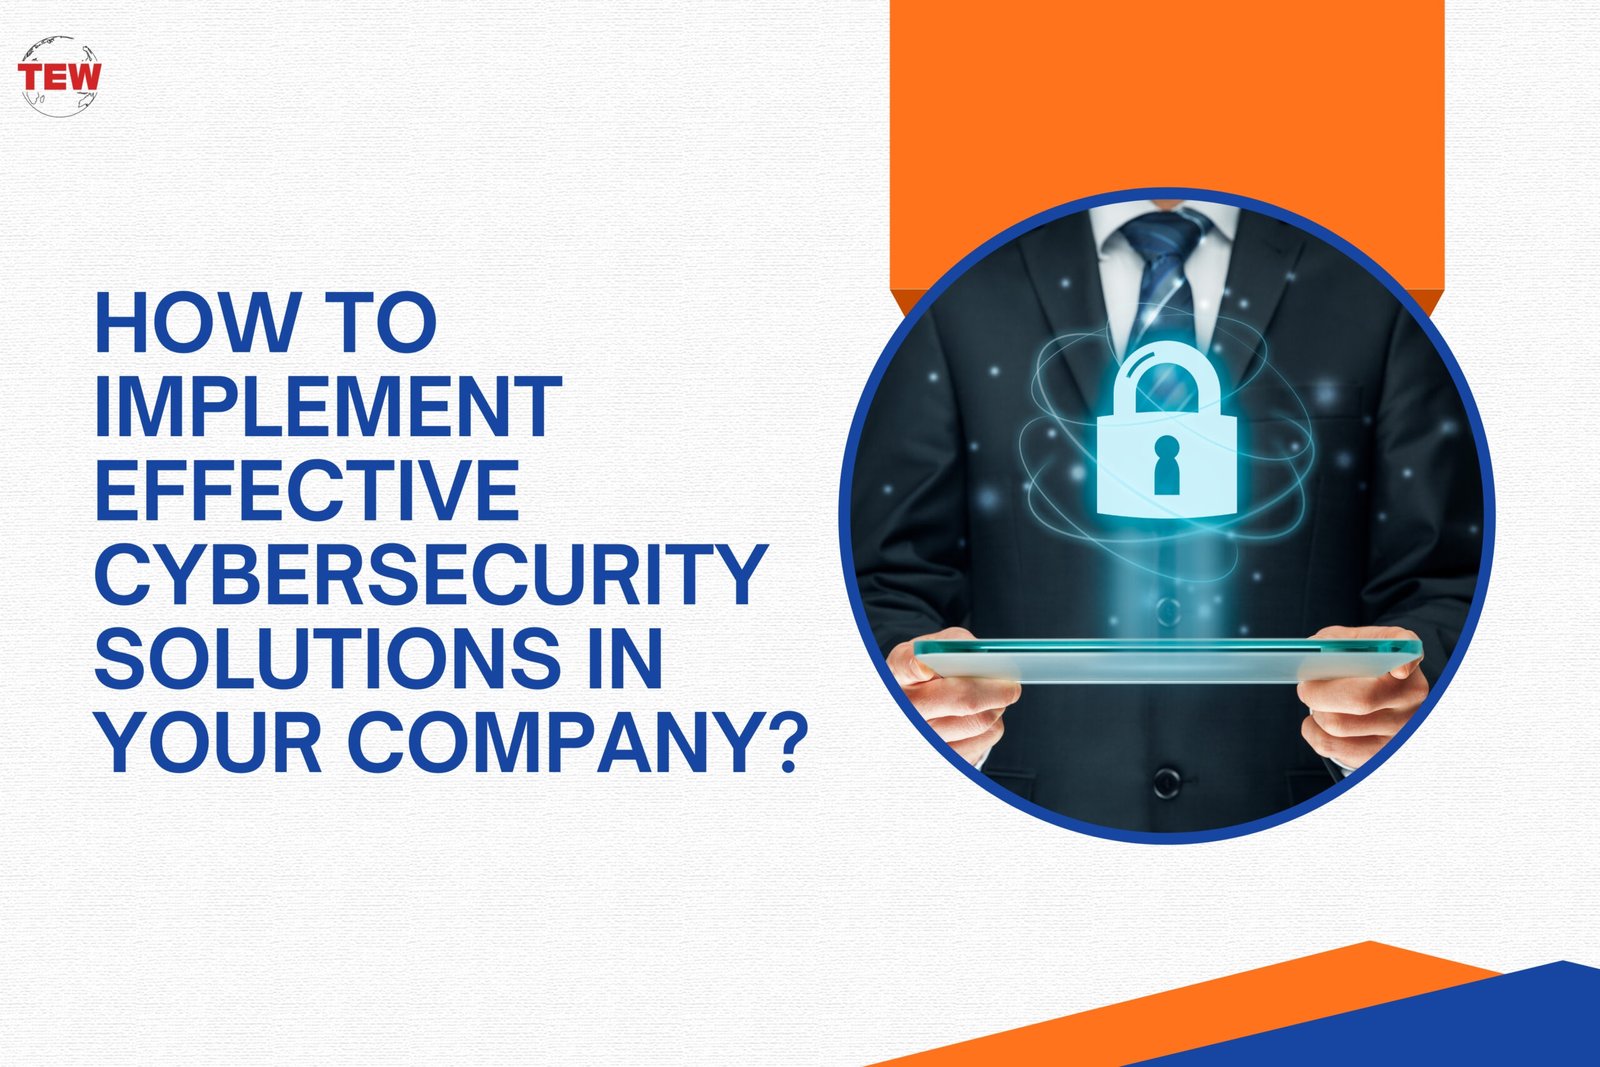 How To Implement Effective Cybersecurity Solutions In Your Company?